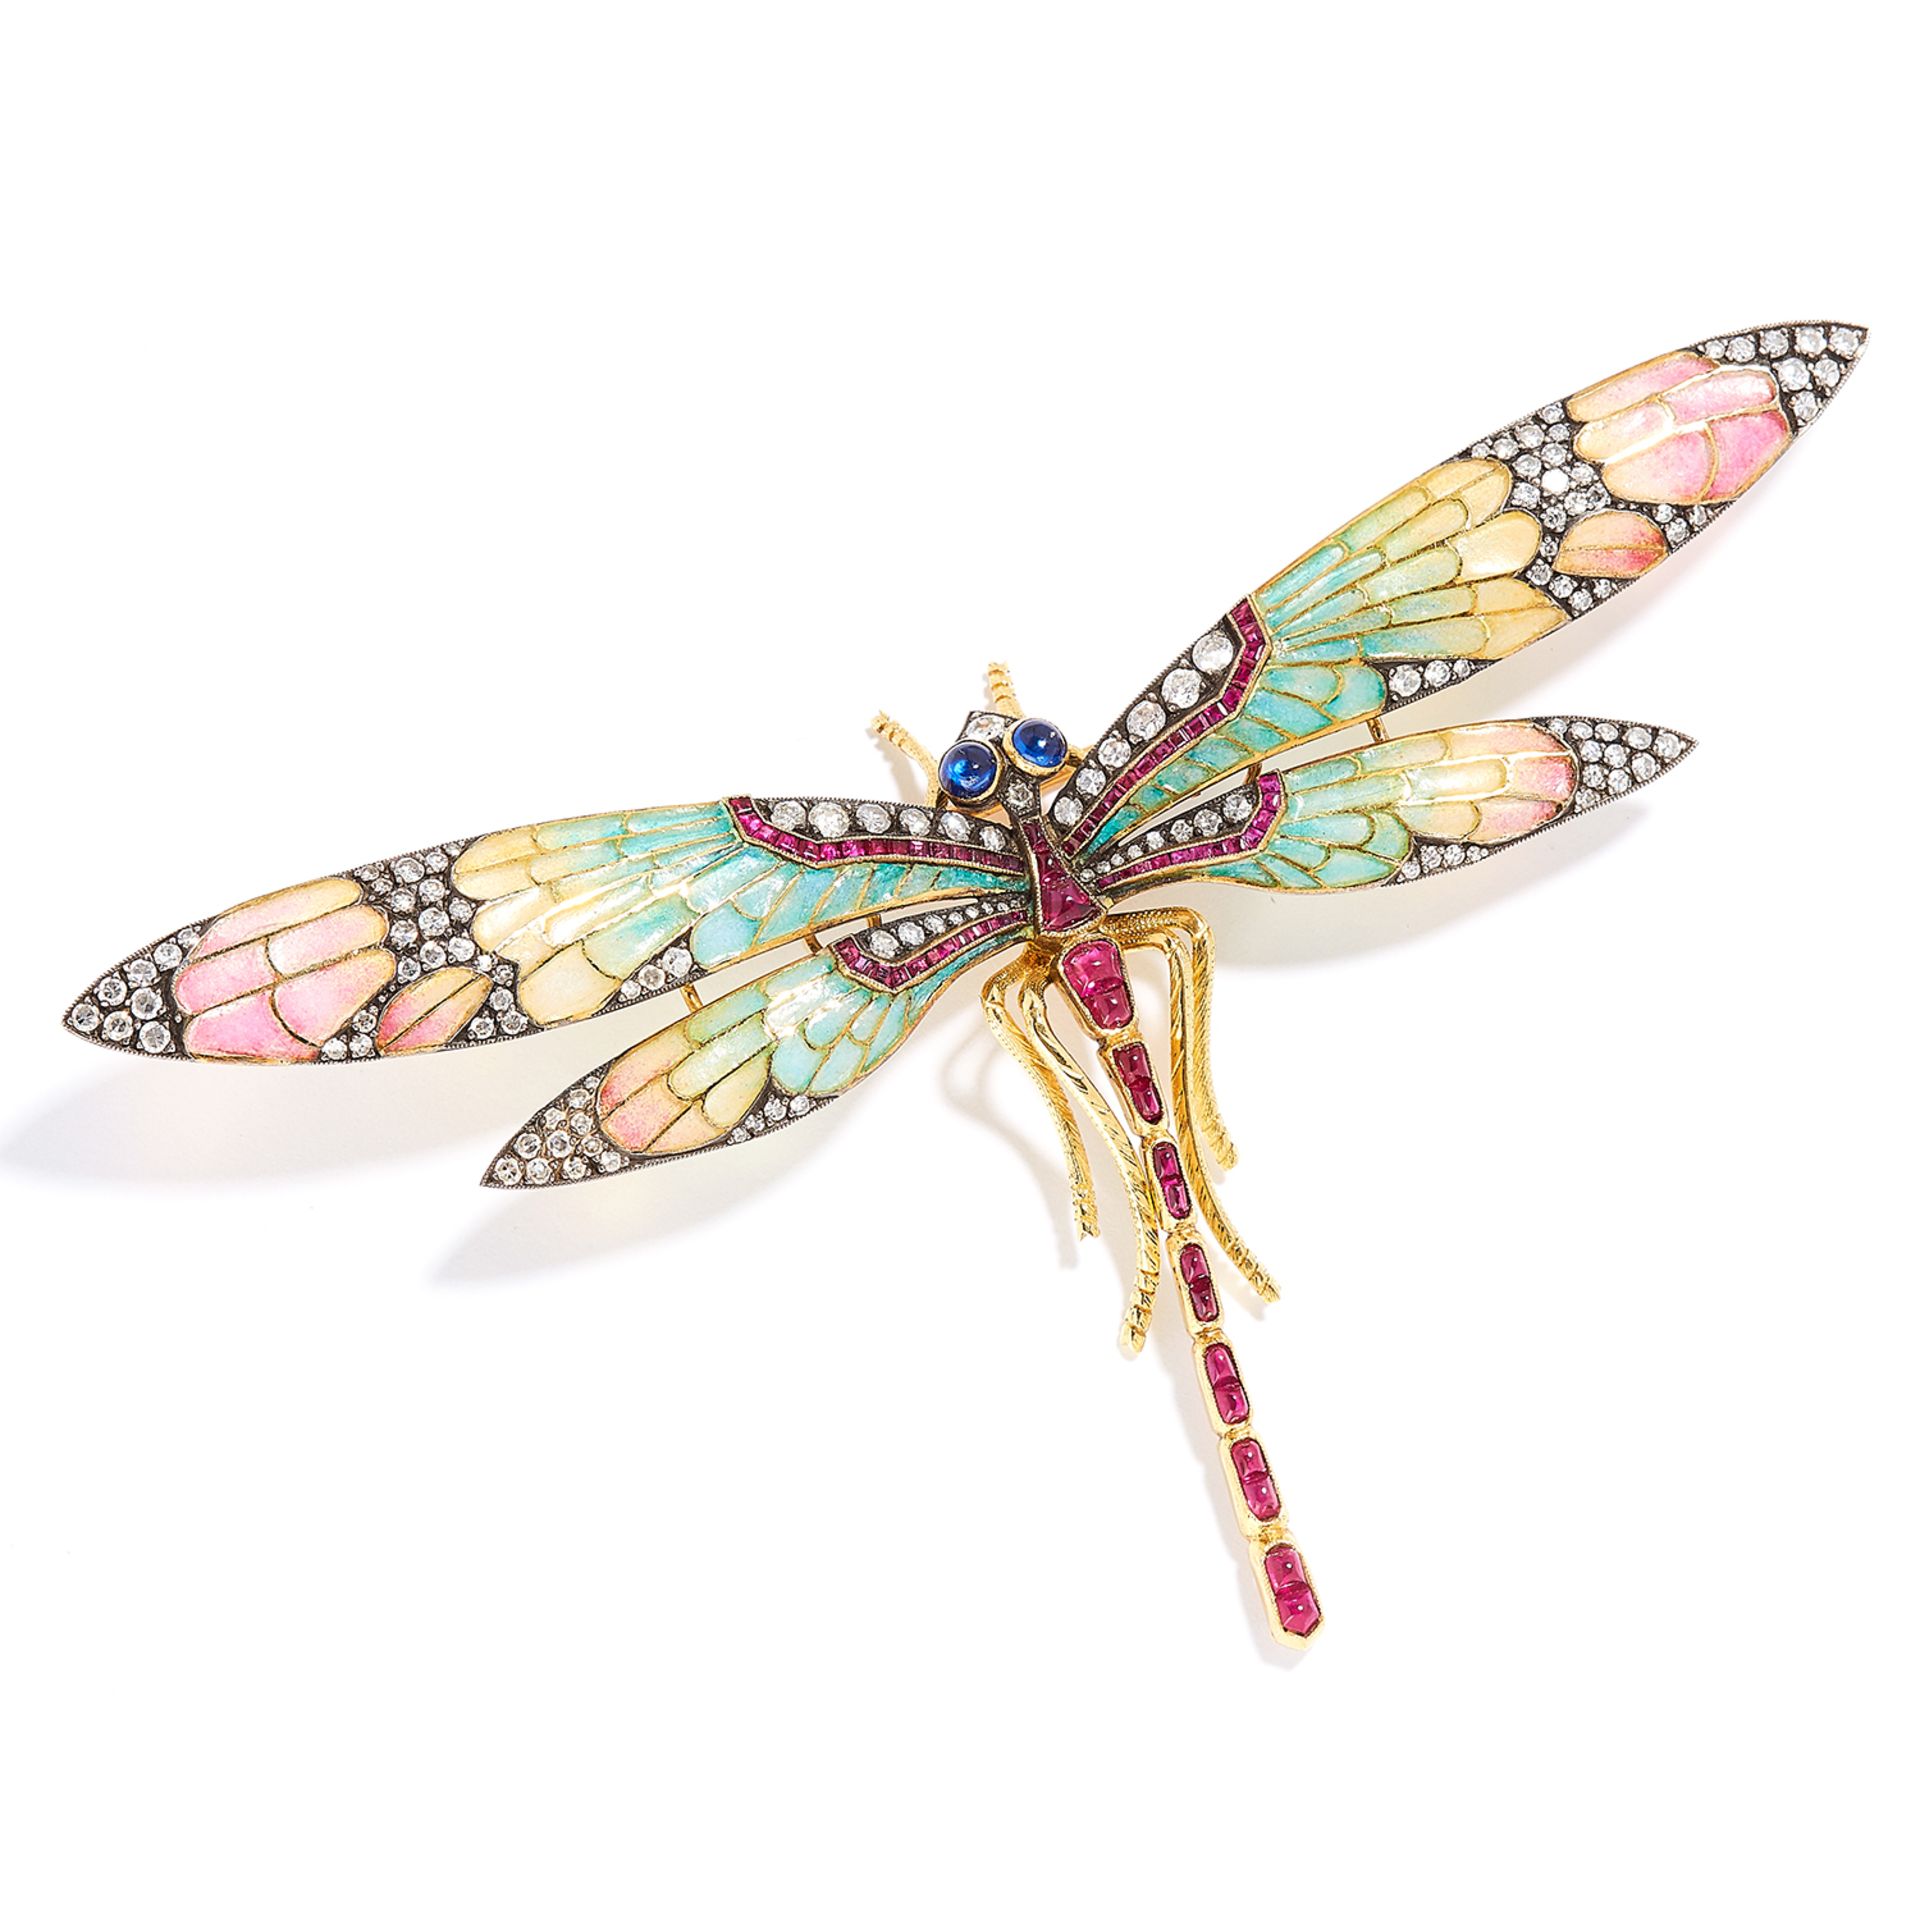 ANTIQUE ART NOUVEAU RUBY, SAPPHIRE, ENAMEL AND DIAMOND DRAGONFLY BROOCH in high carat yellow gold,